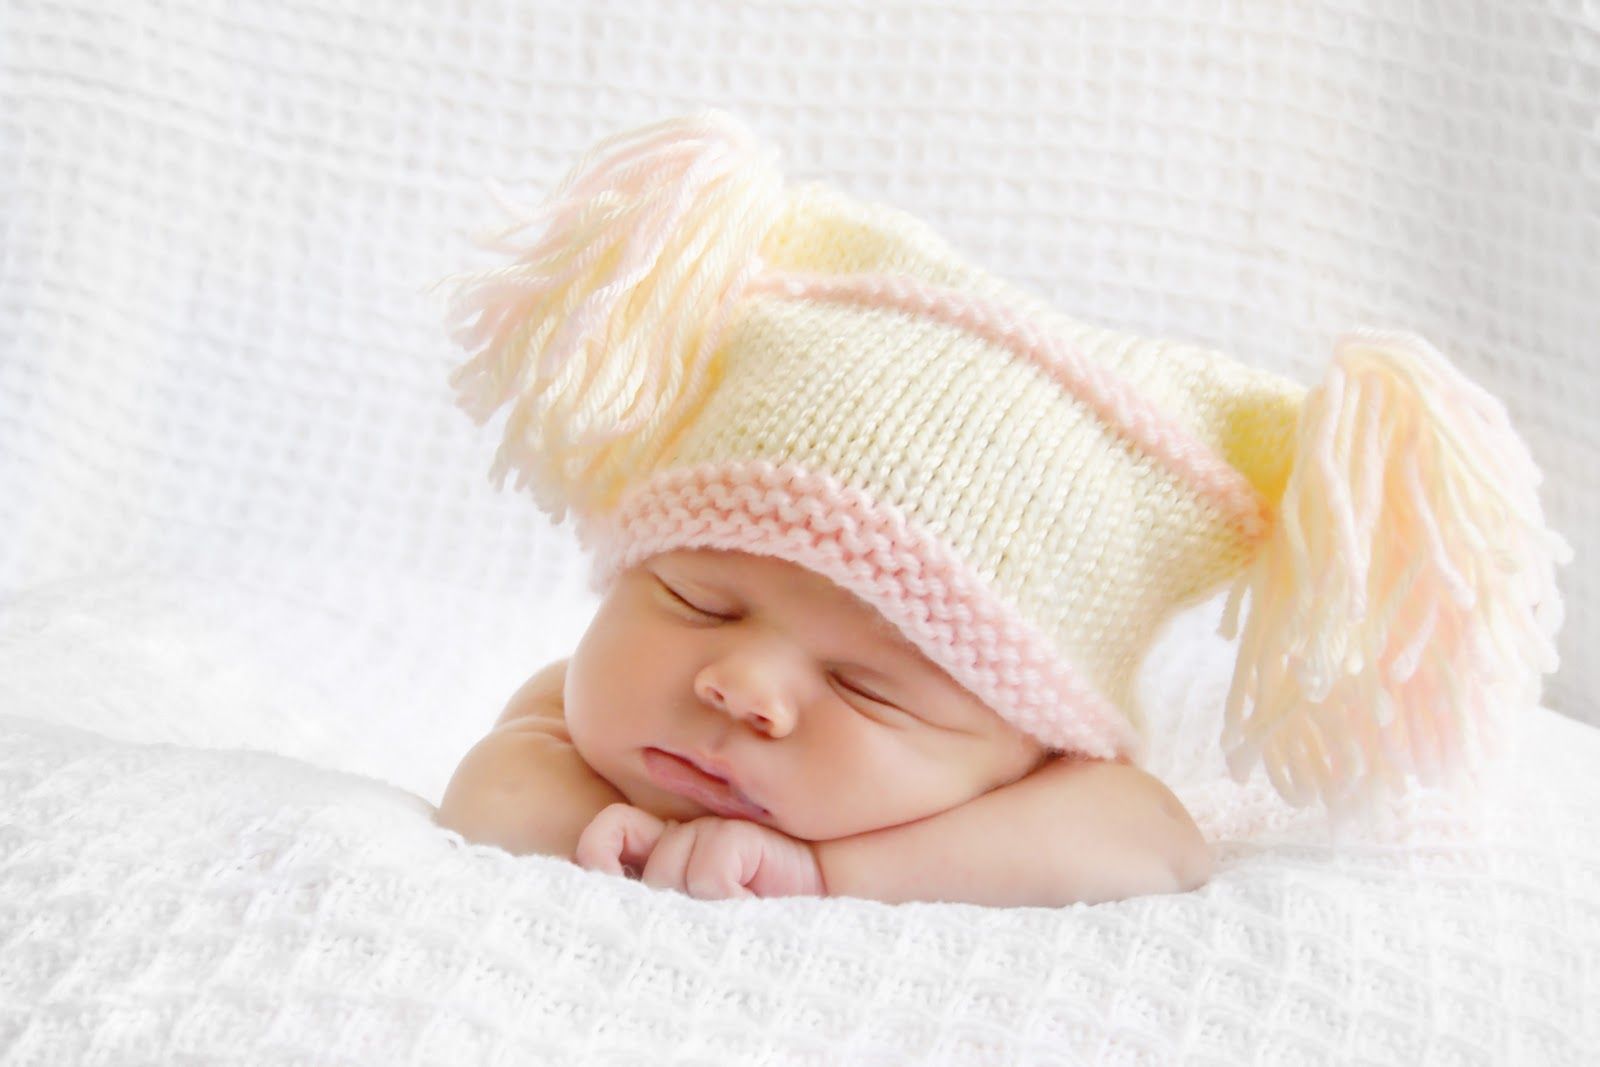 New Born Baby Wallpapers - HD Wallpapers Backgrounds of Your Choice